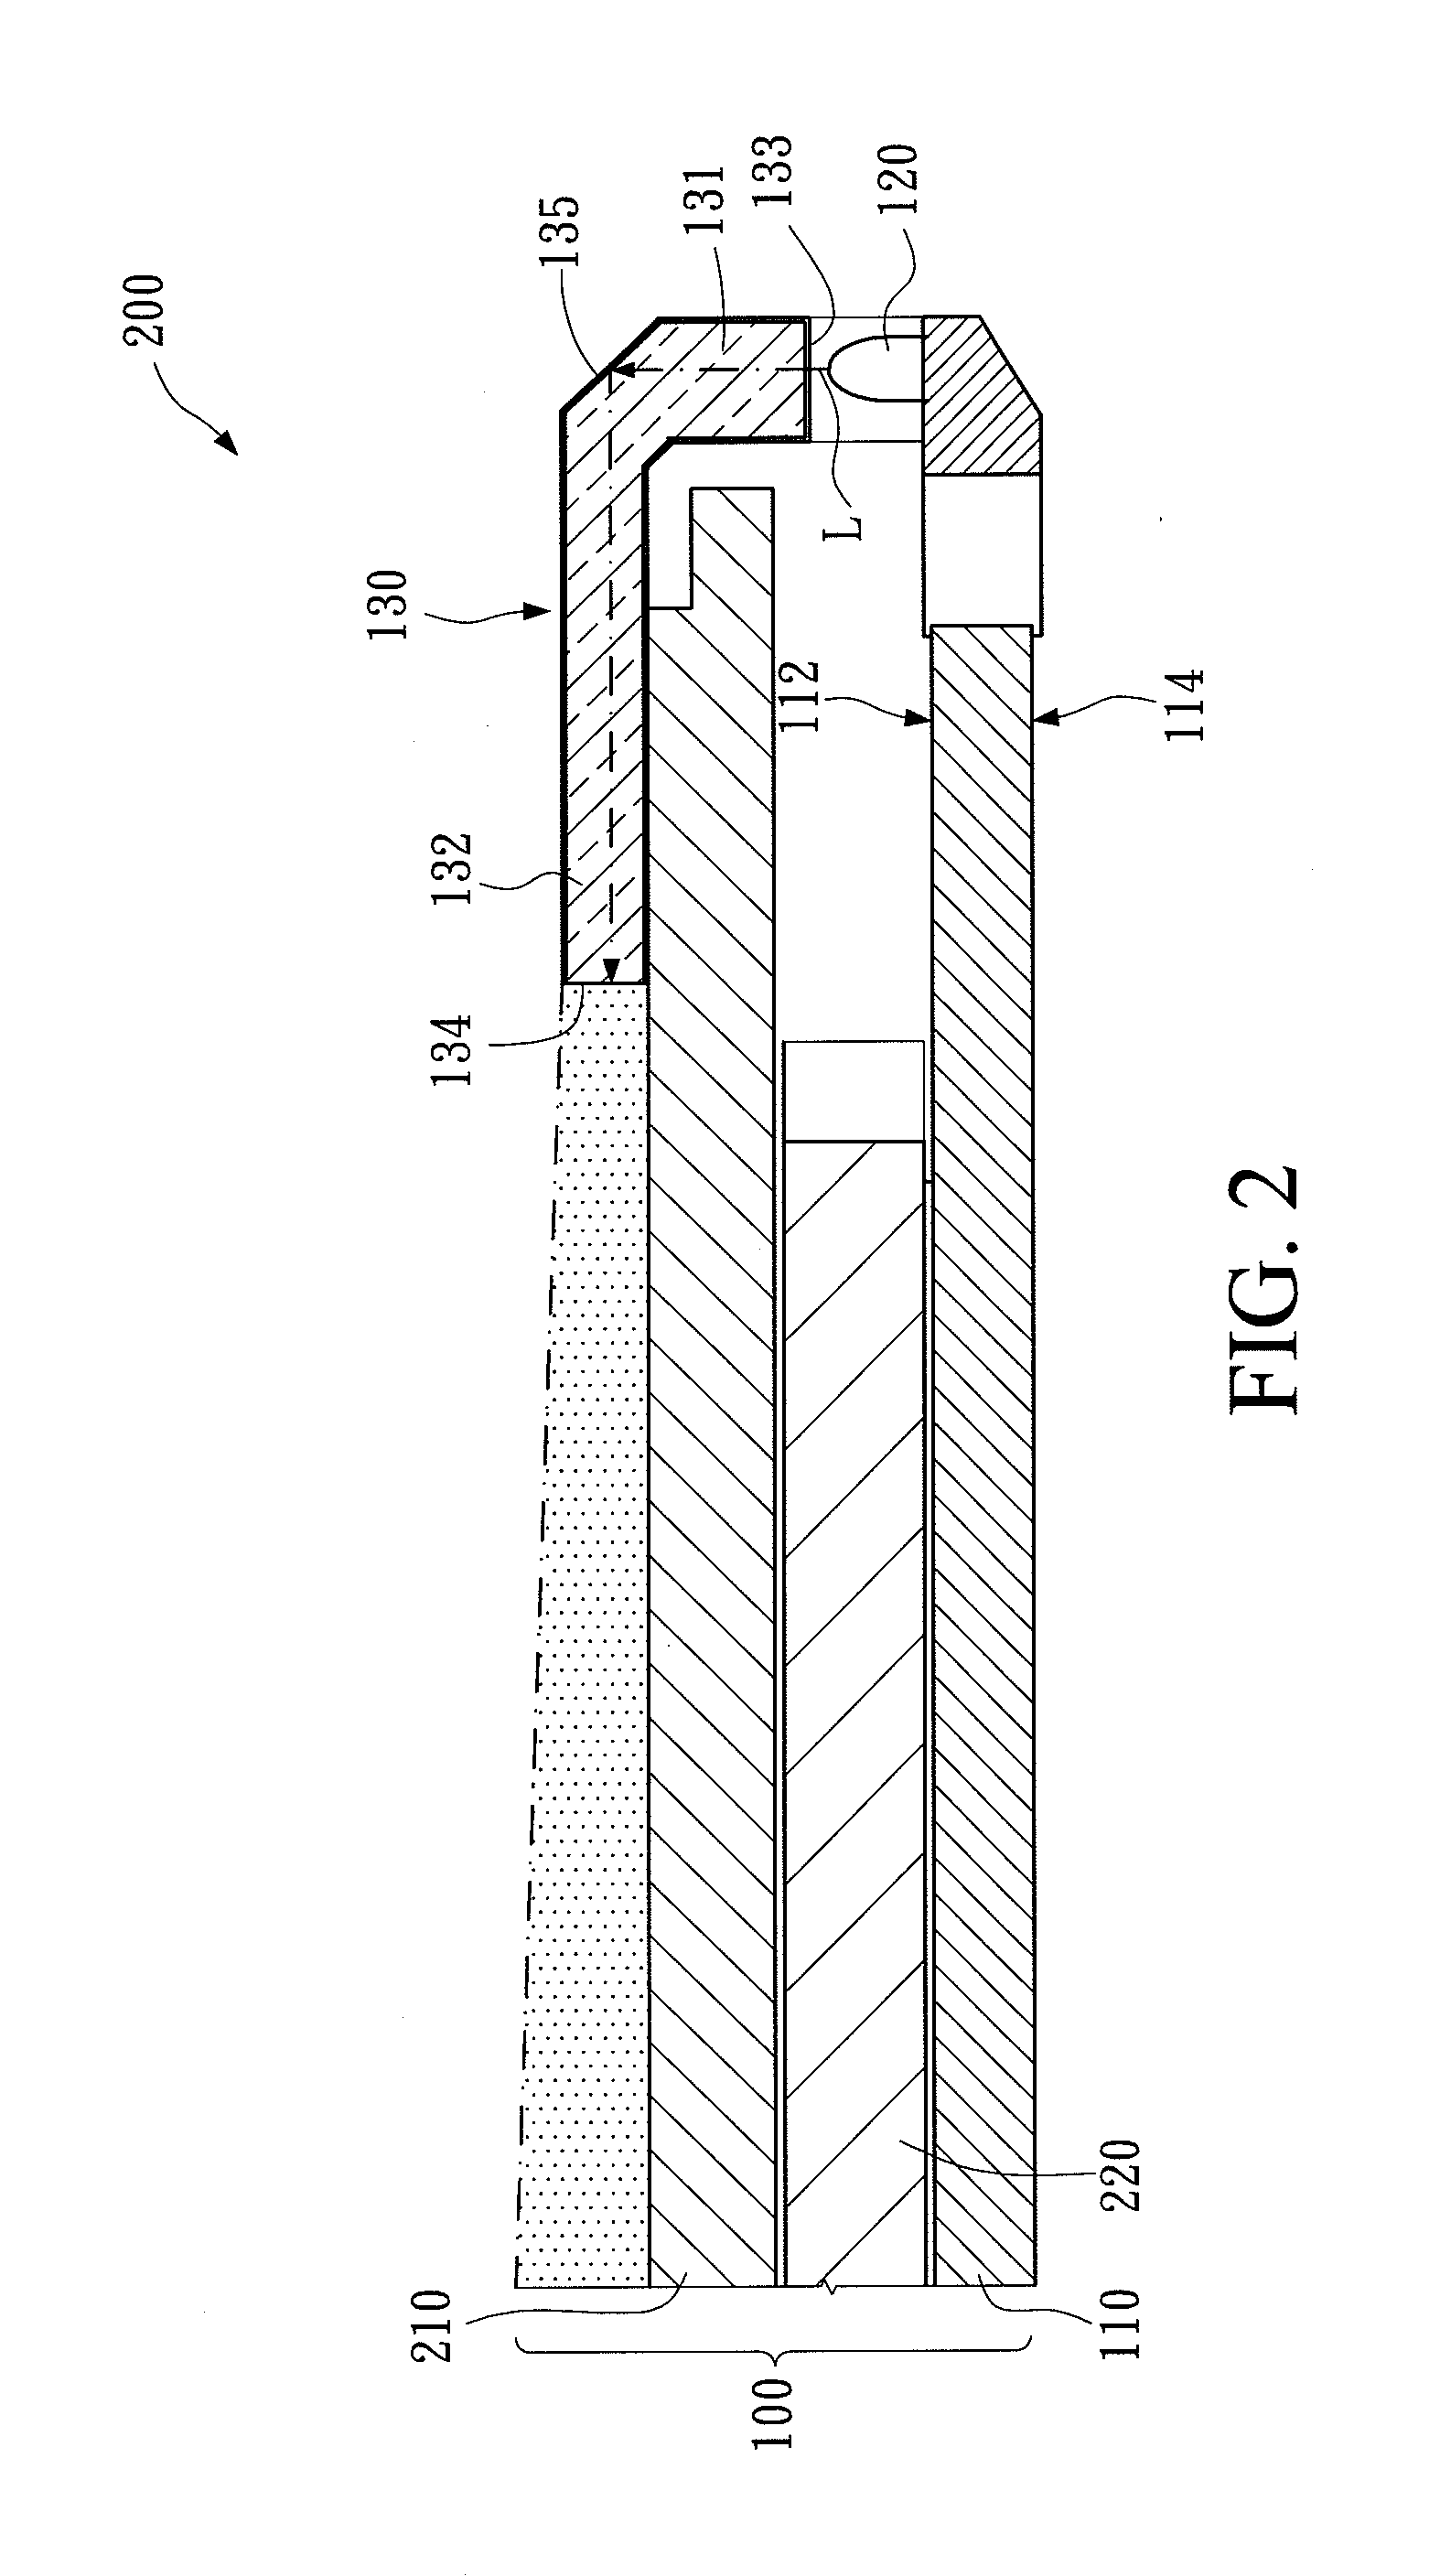 Illumination assembly and display module